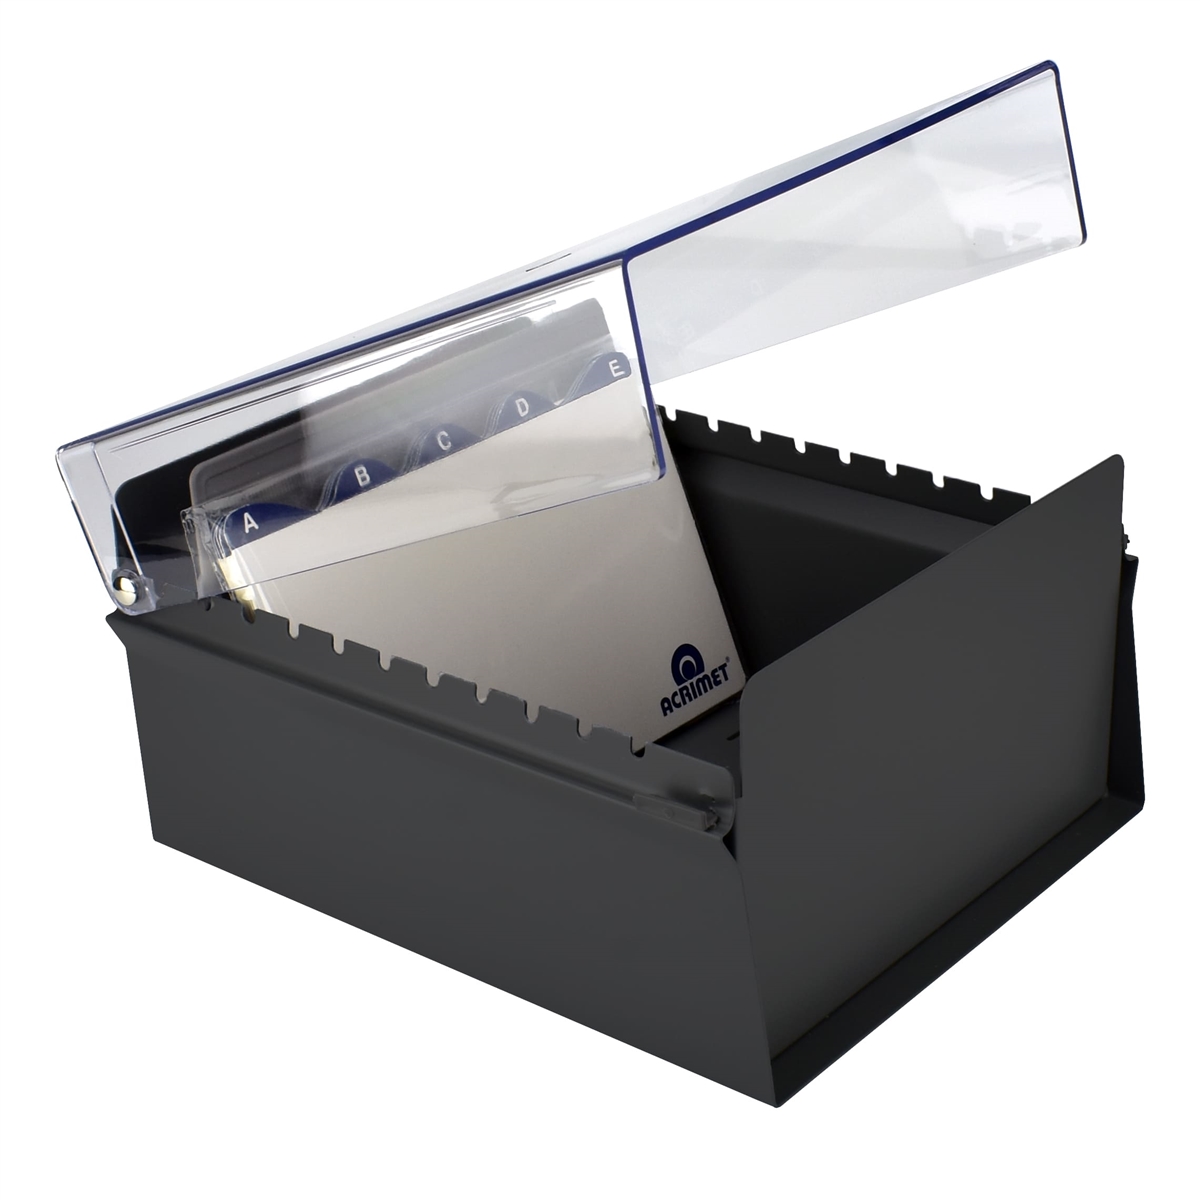 Acrimet 6 x 9 Card File Holder Organizer Metal (AZ Index Cards and Divider  Included) (Black Color with Crystal Plastic Lid Cover) 924.7